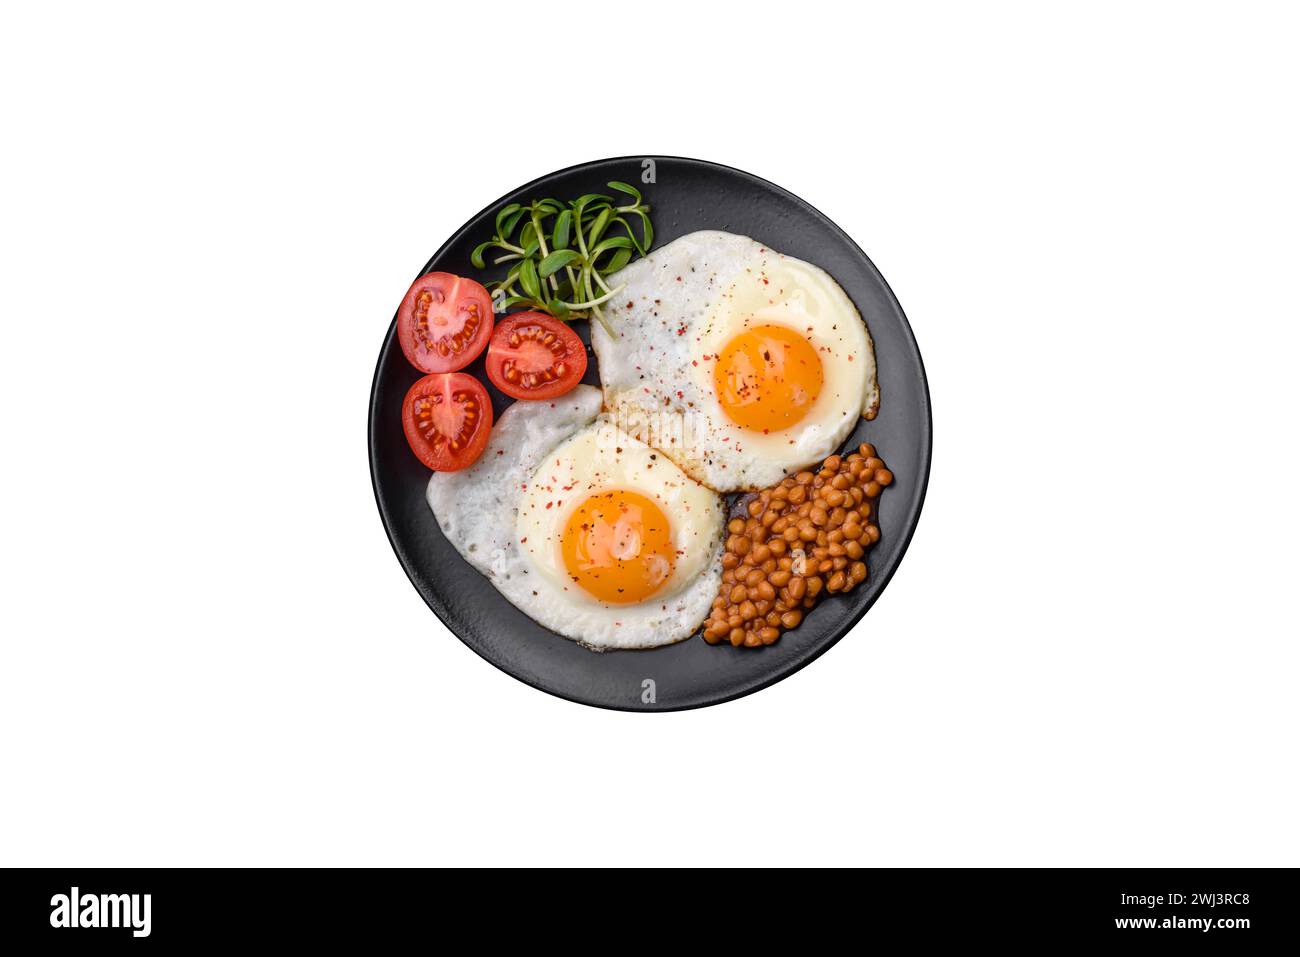 Delicious hearty breakfast consisting of two fried eggs, canned lentils and microgreens Stock Photo